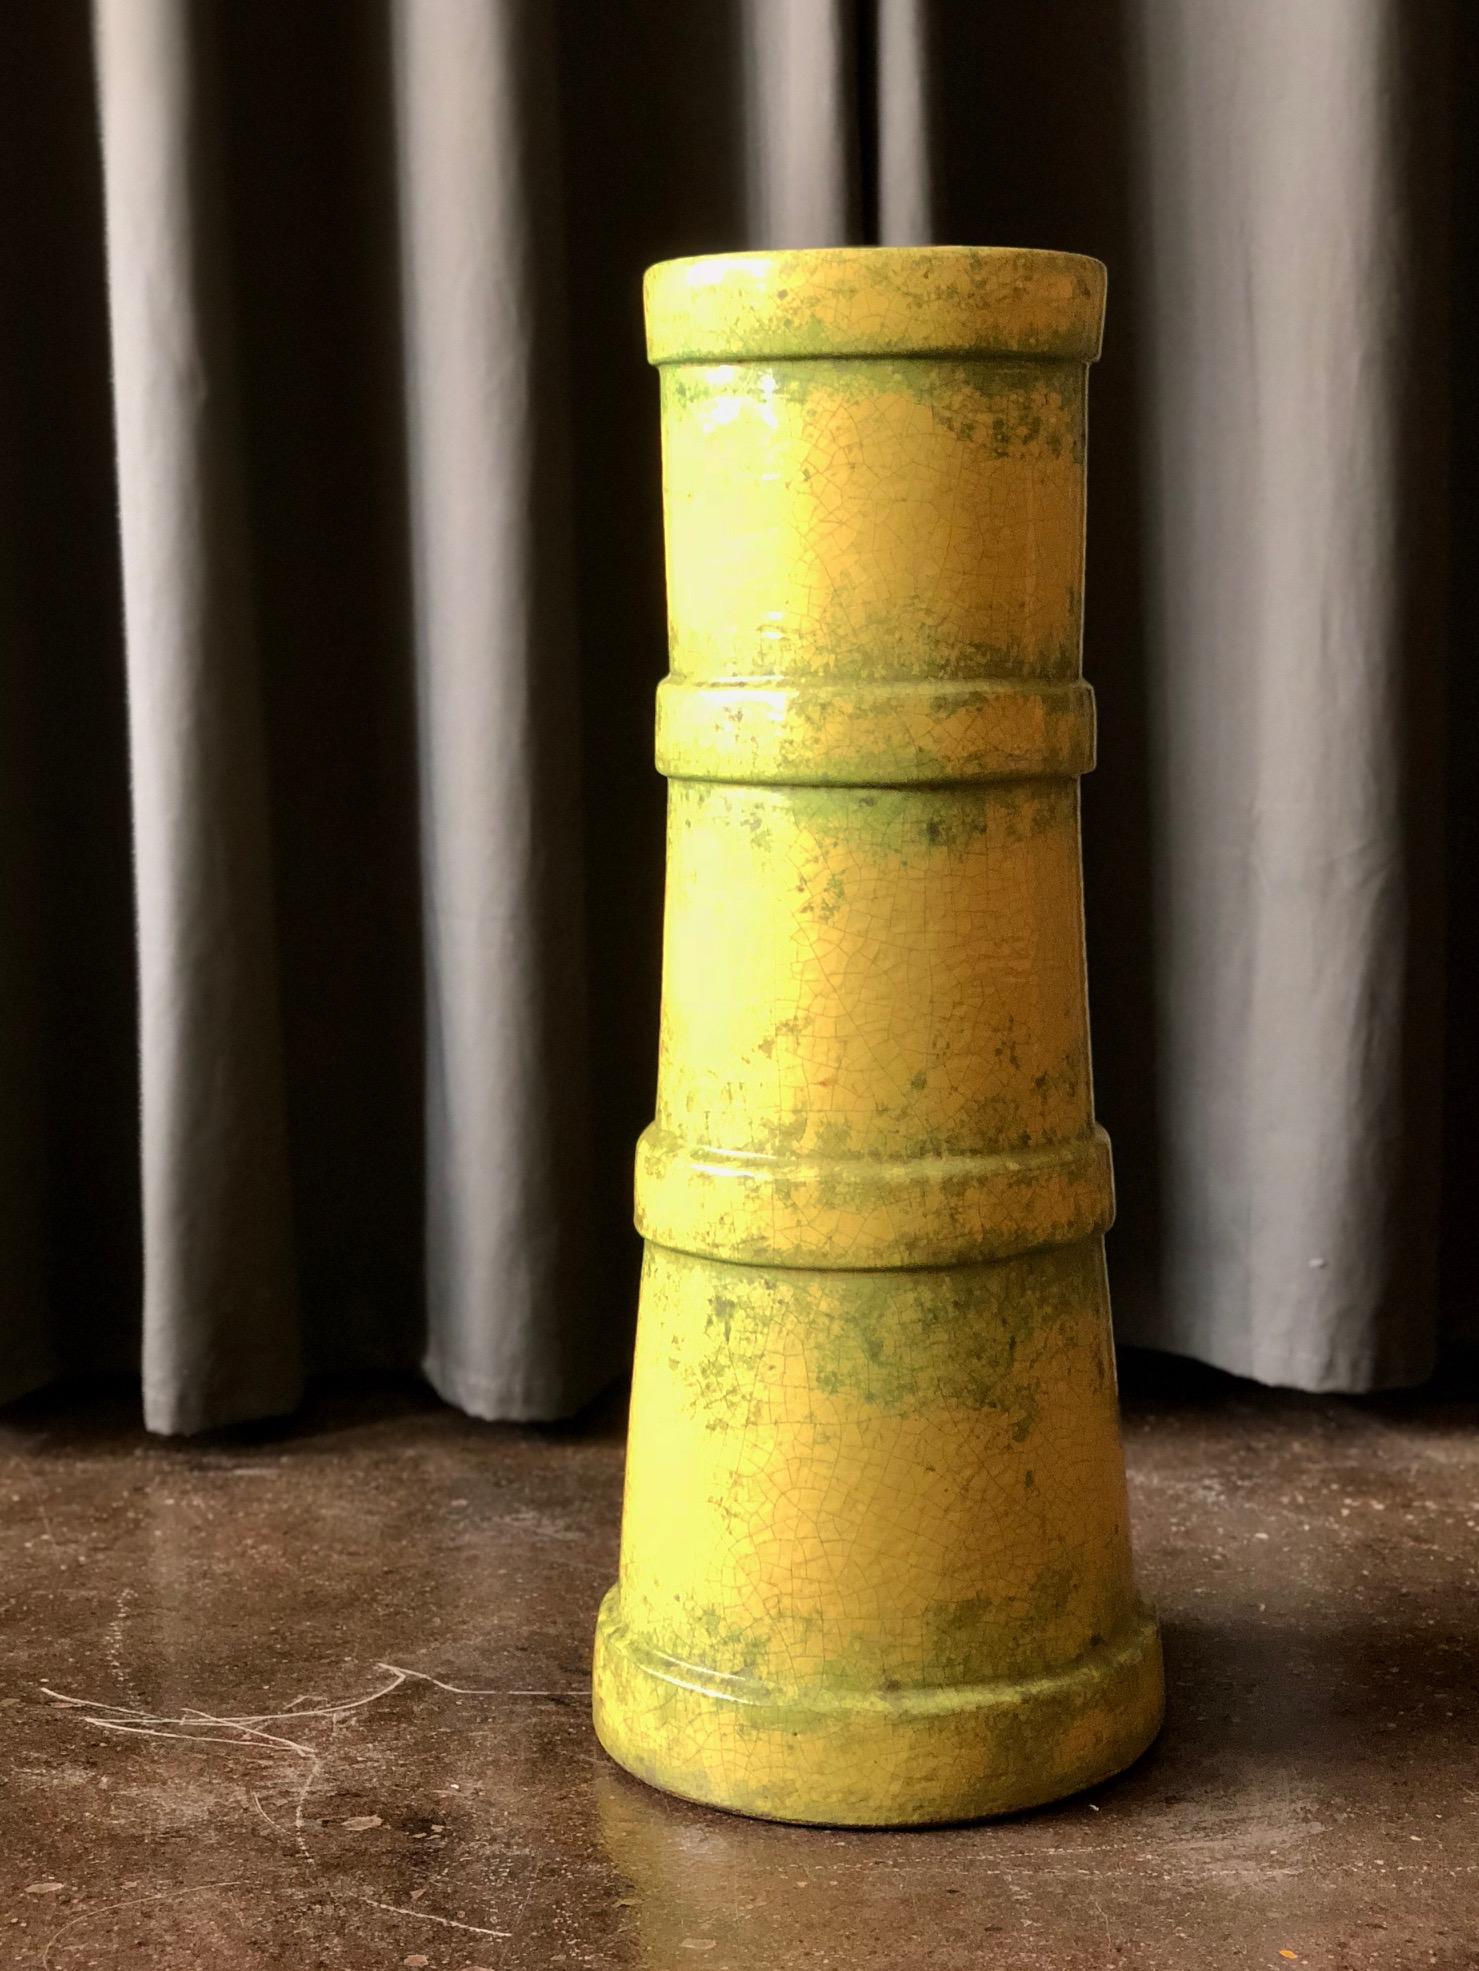 Monumental floor vase by Hans Hedberg (1917-2007) born in Sweden, work in Boet, France.
Stoneware with speckled glaze in green and yellow, signed, height about 28